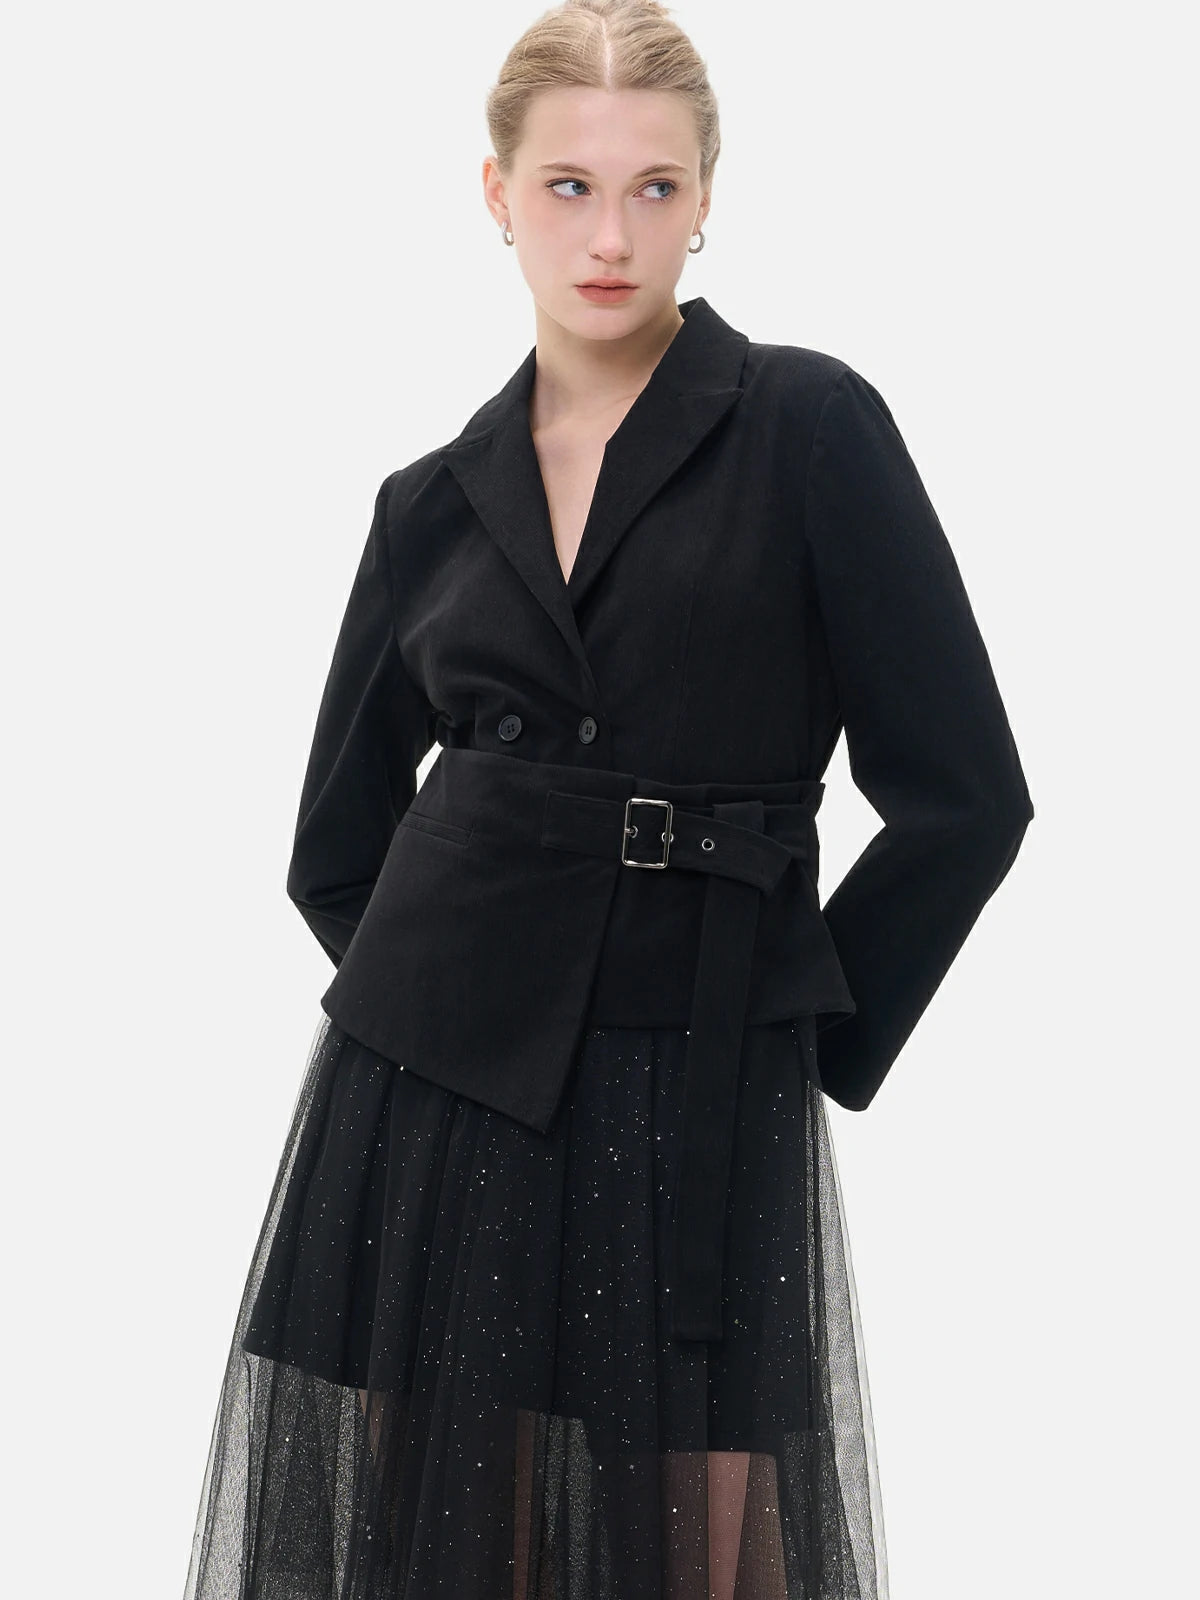 Professional women&#39;s fashion ensemble, combining a classic double-breasted suit with a detachable waist belt and an elegantly attached mesh skirt.